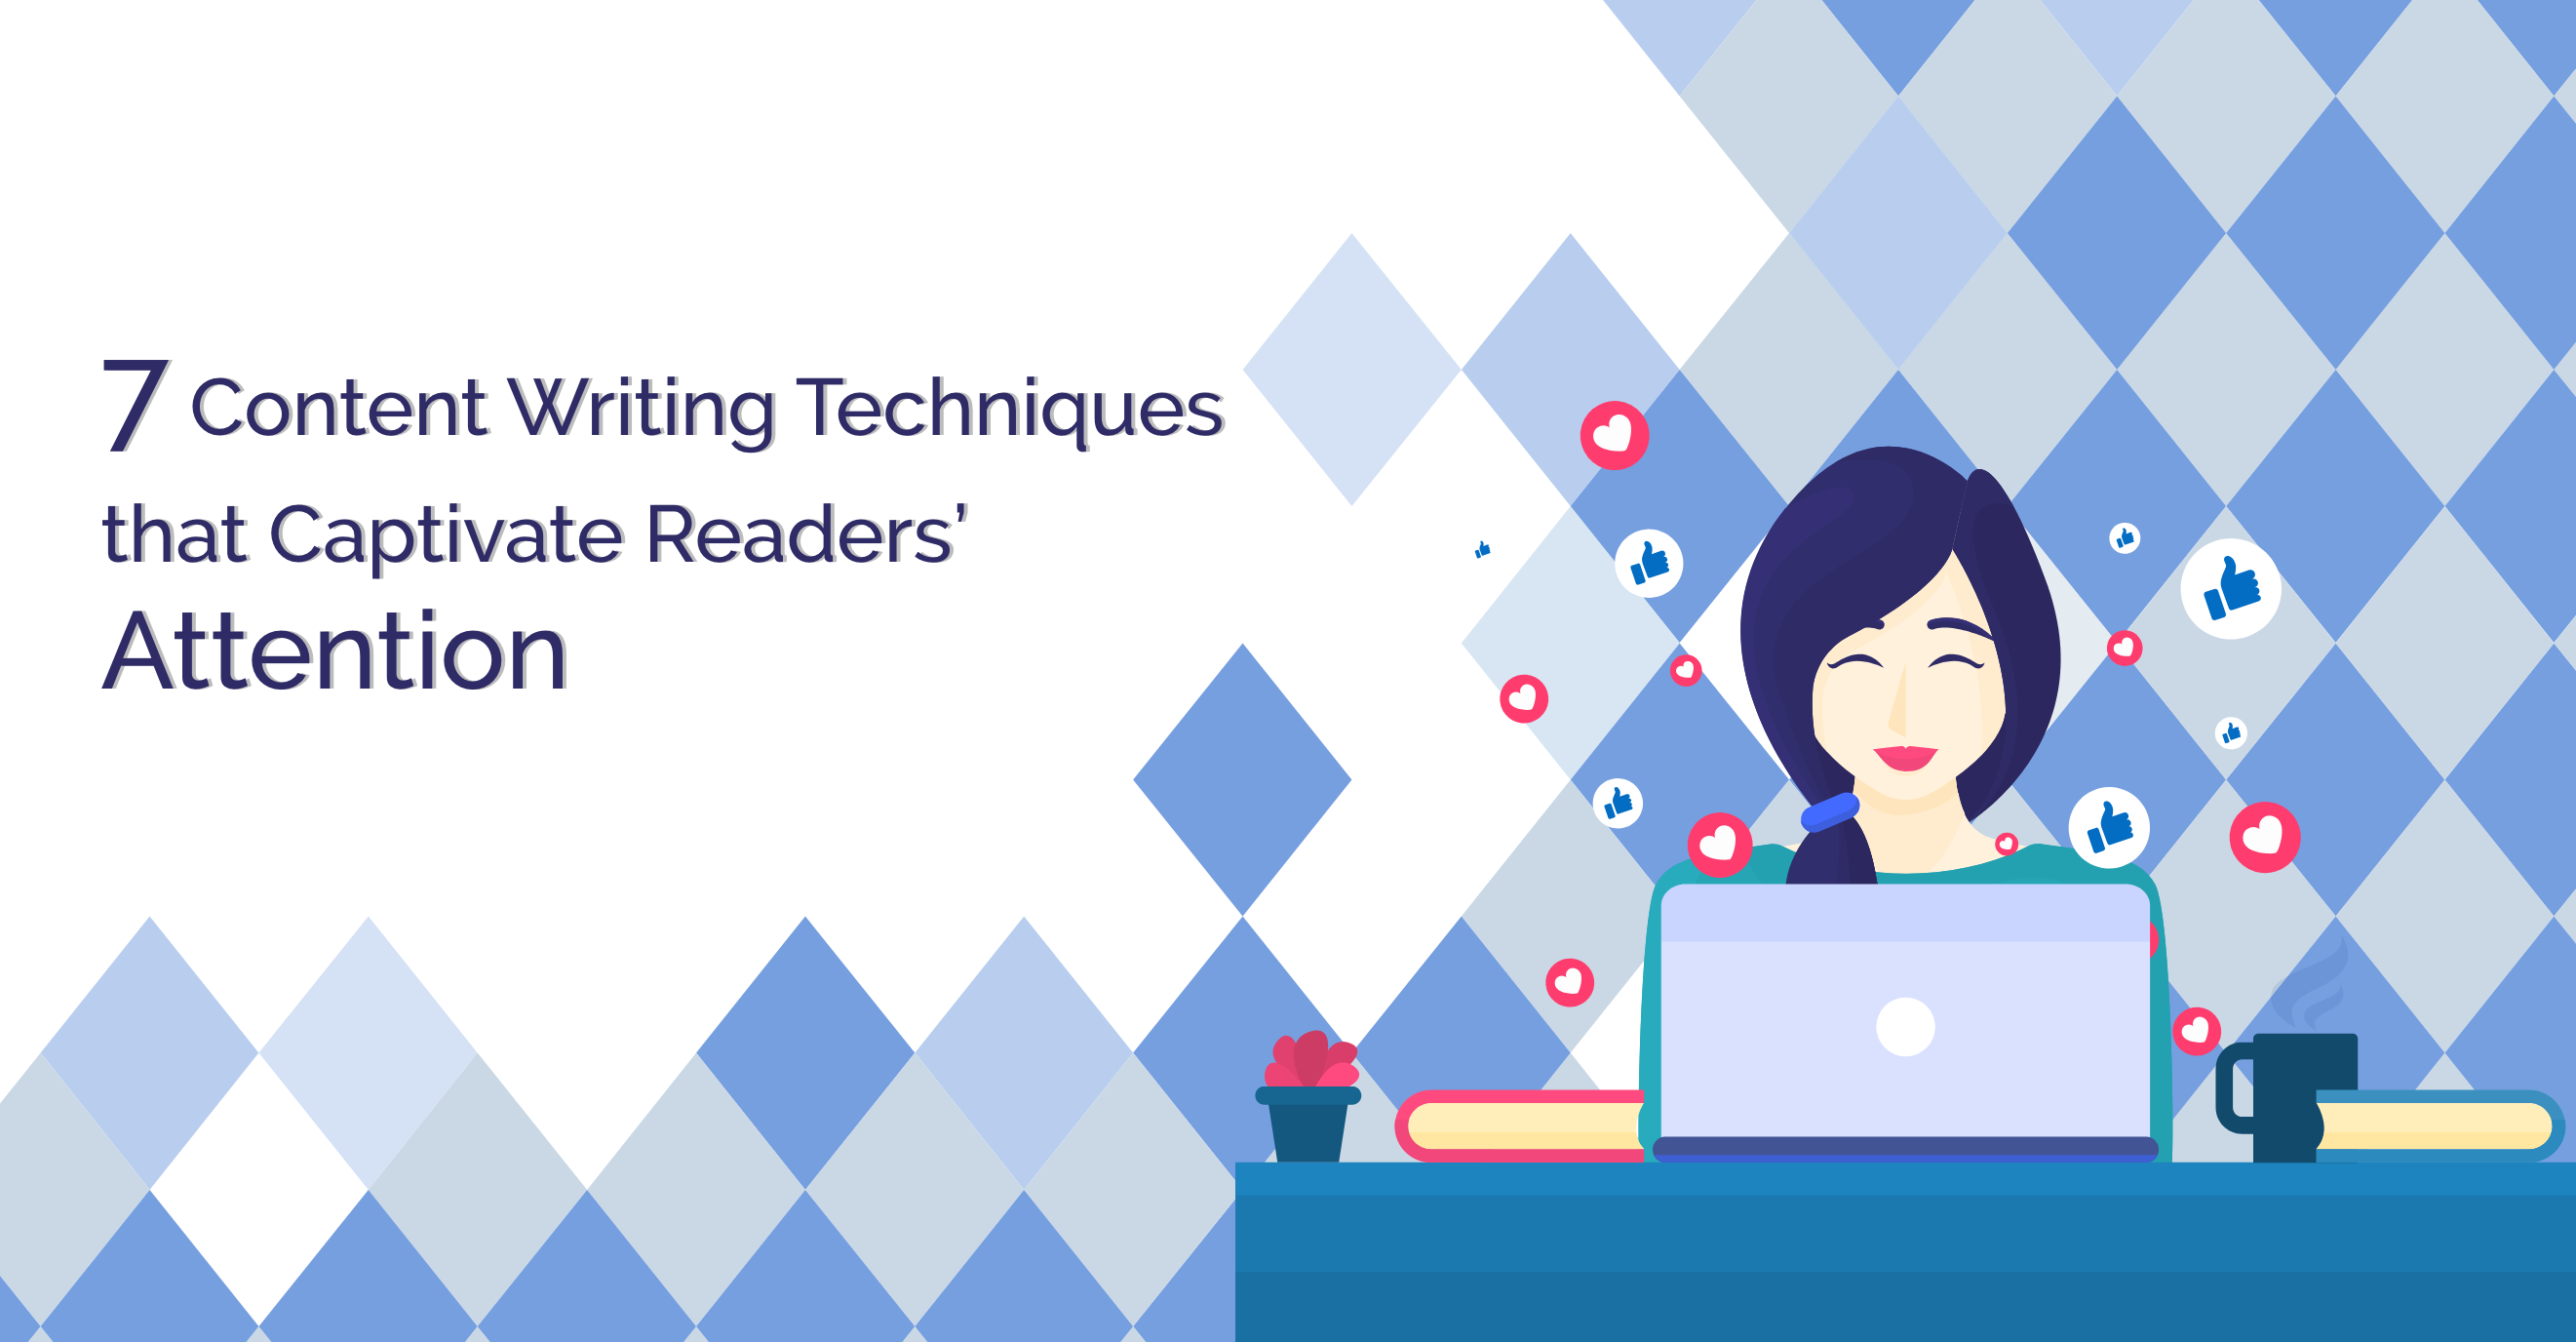 7 Content Writing Techniques that Captivate Readers’ Attention